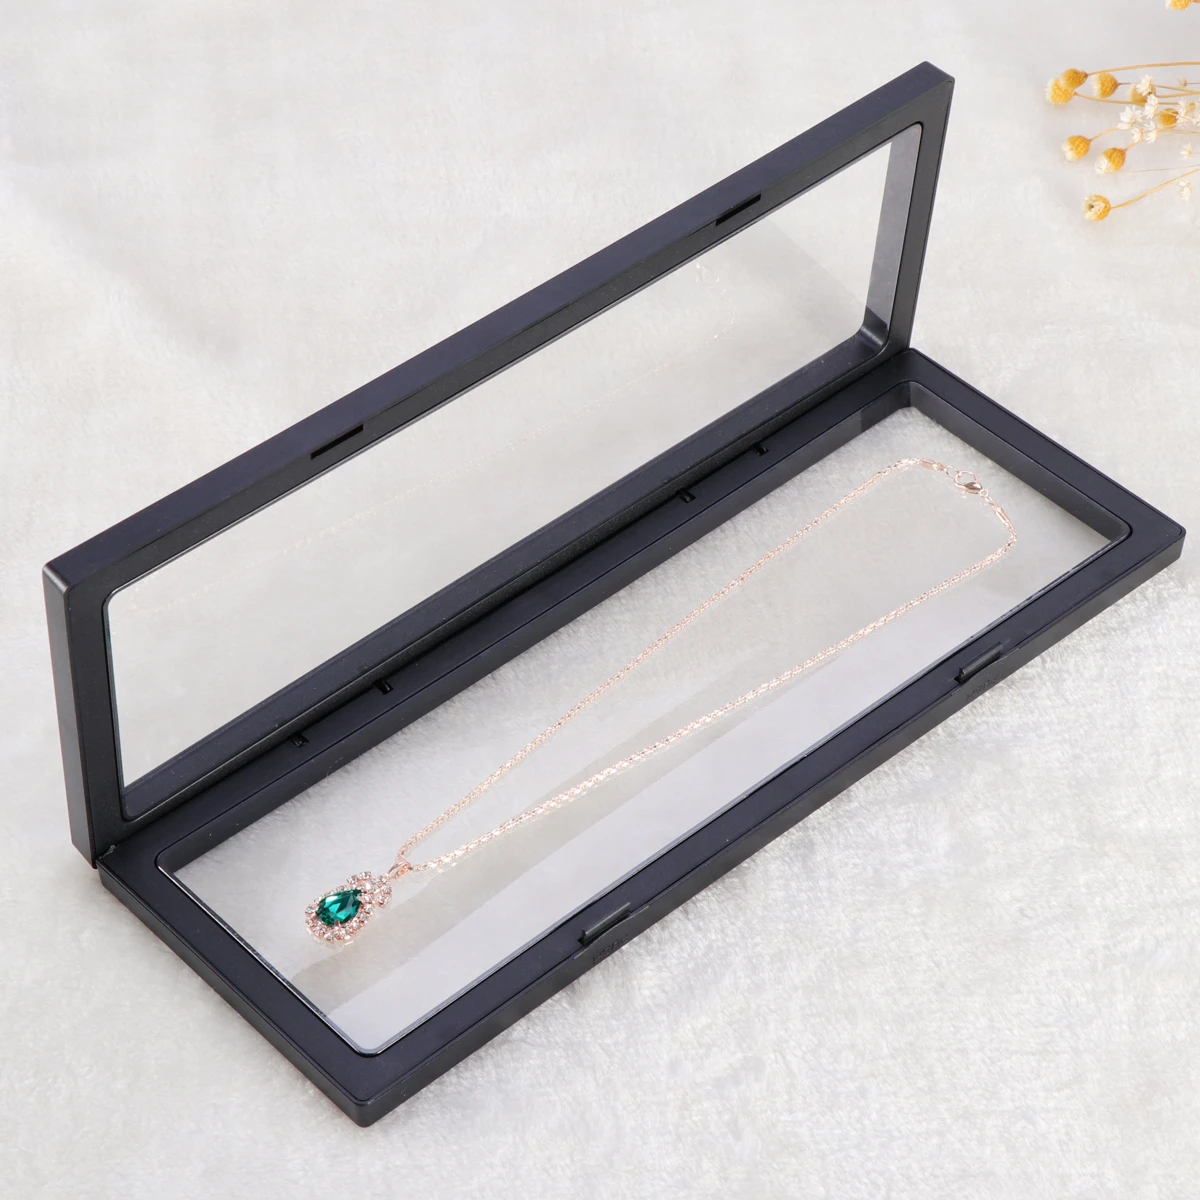 3D Floating Frame Shadow Box Display Case Coin Jewelry Show 23*9cm